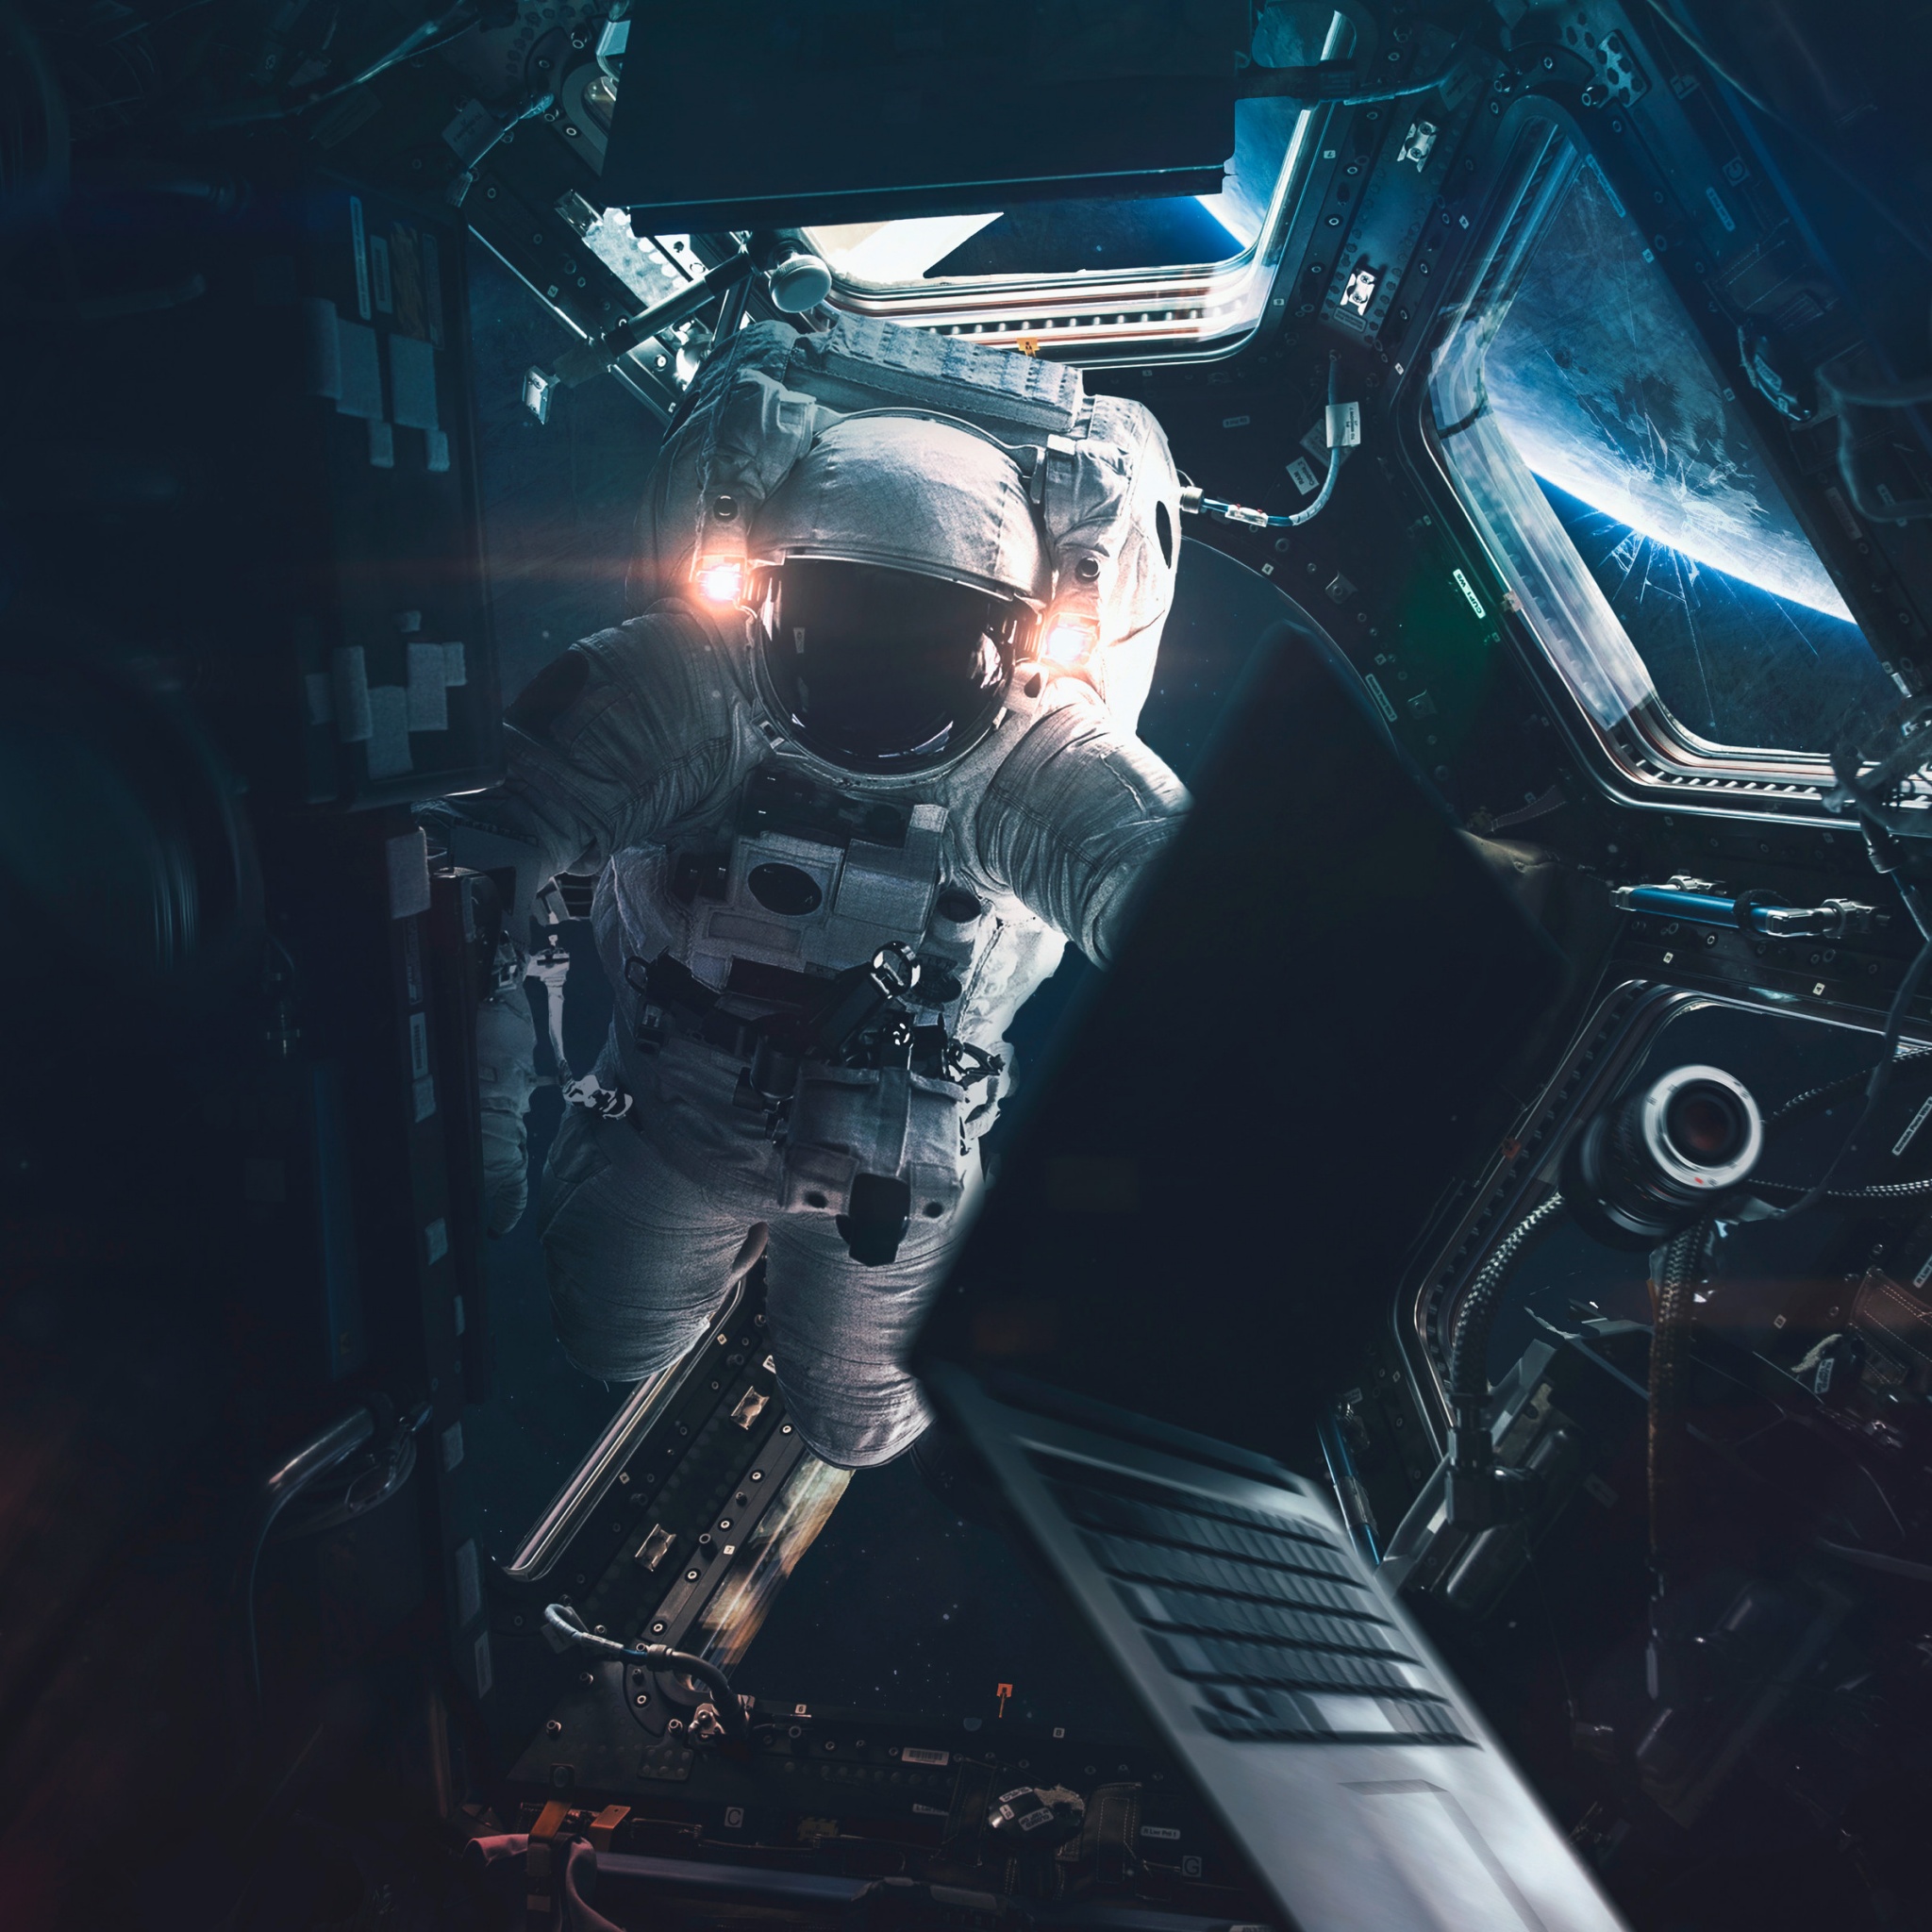 Free download 327301 Space Astronaut 4K phone HD Wallpapers Images  2160x3840 for your Desktop Mobile  Tablet  Explore 19 Space Astronaut  Wallpapers  Astronaut Wallpaper Cool Astronaut Wallpapers Burning Astronaut  Wallpaper